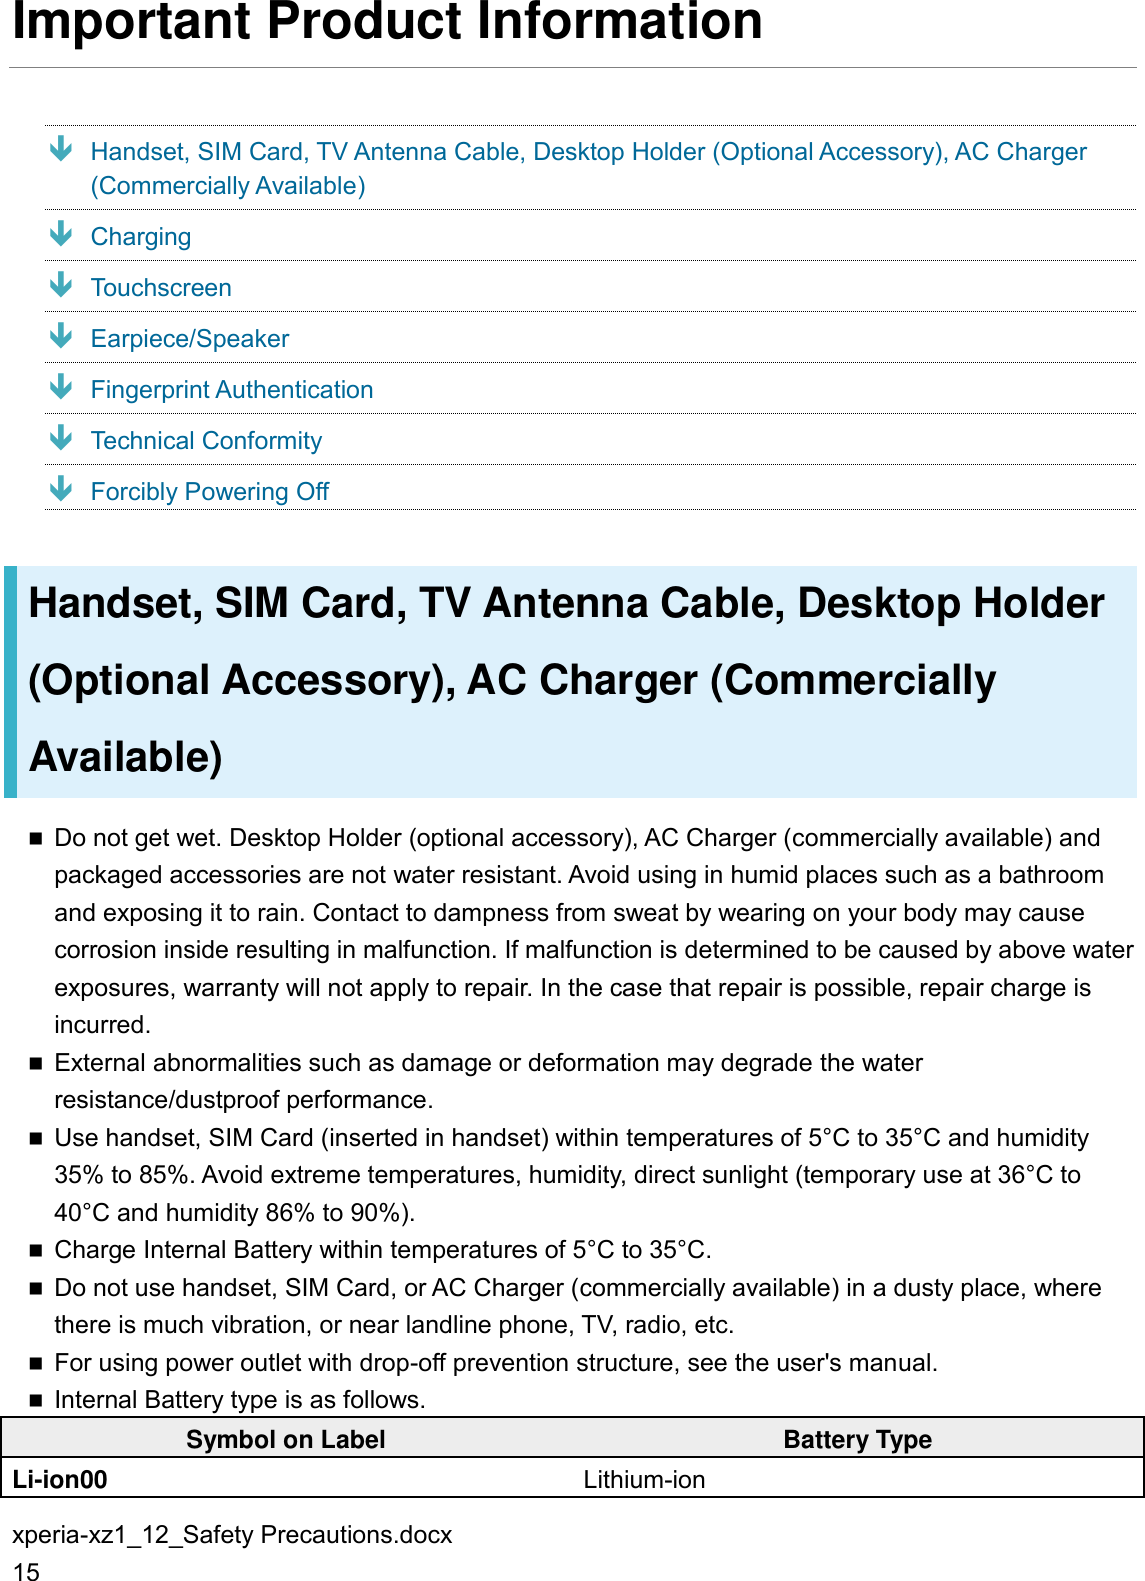 Page 174 of Sony 88607S GSM/WCDMA/LTE Phone with BT, DTS/UNII a/b/g/n/ac, GPS & NFC User Manual PY7 88607S User Guide